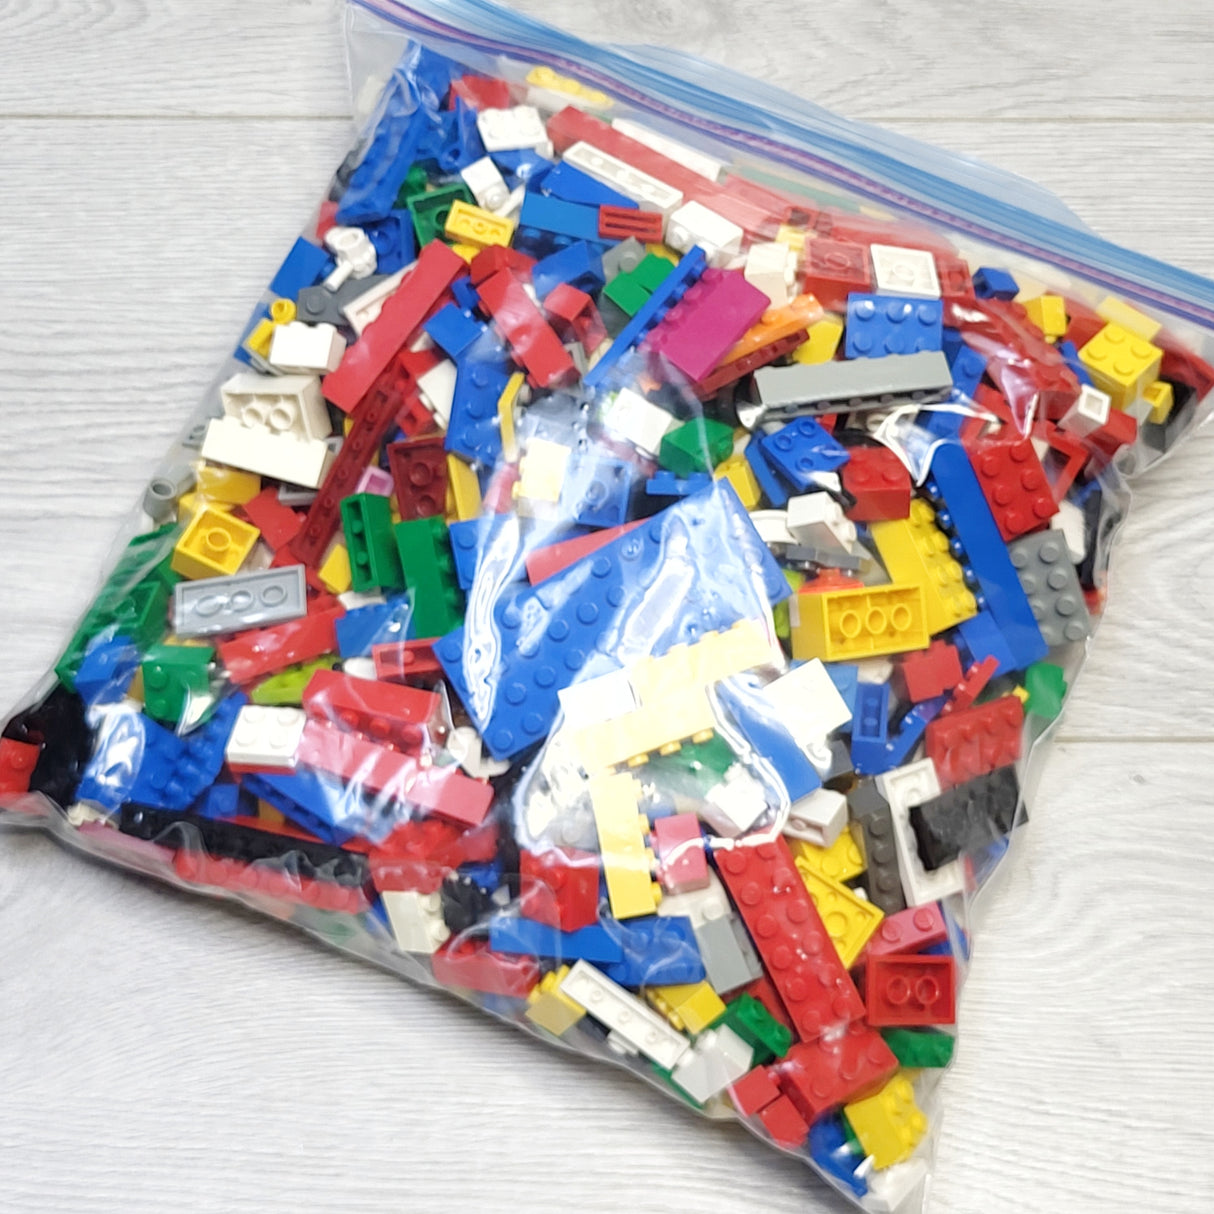 CHAM2 - LEGO Lot (approx 2 to 2.5 lbs)